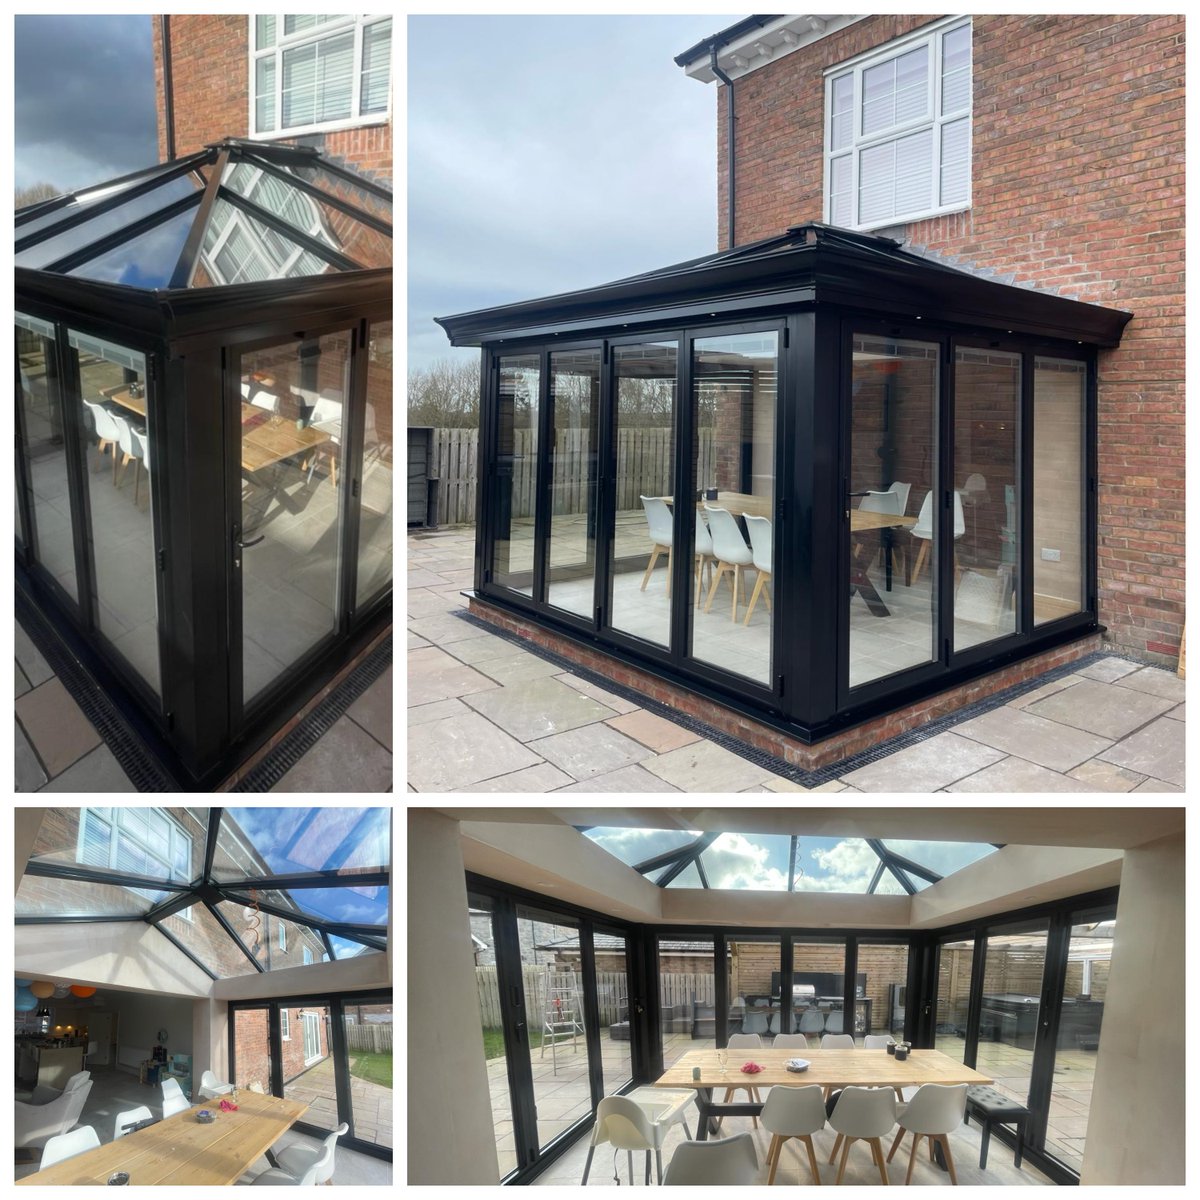 Happy Friday followers! Here's a stunning installation recently completed, of a glazed kitchen extension. Incorporating black aluminium window frames with bi-folding doors and a modern S2 glass roof with gutter shroud and internal lighting pelmet. A stunning example of a